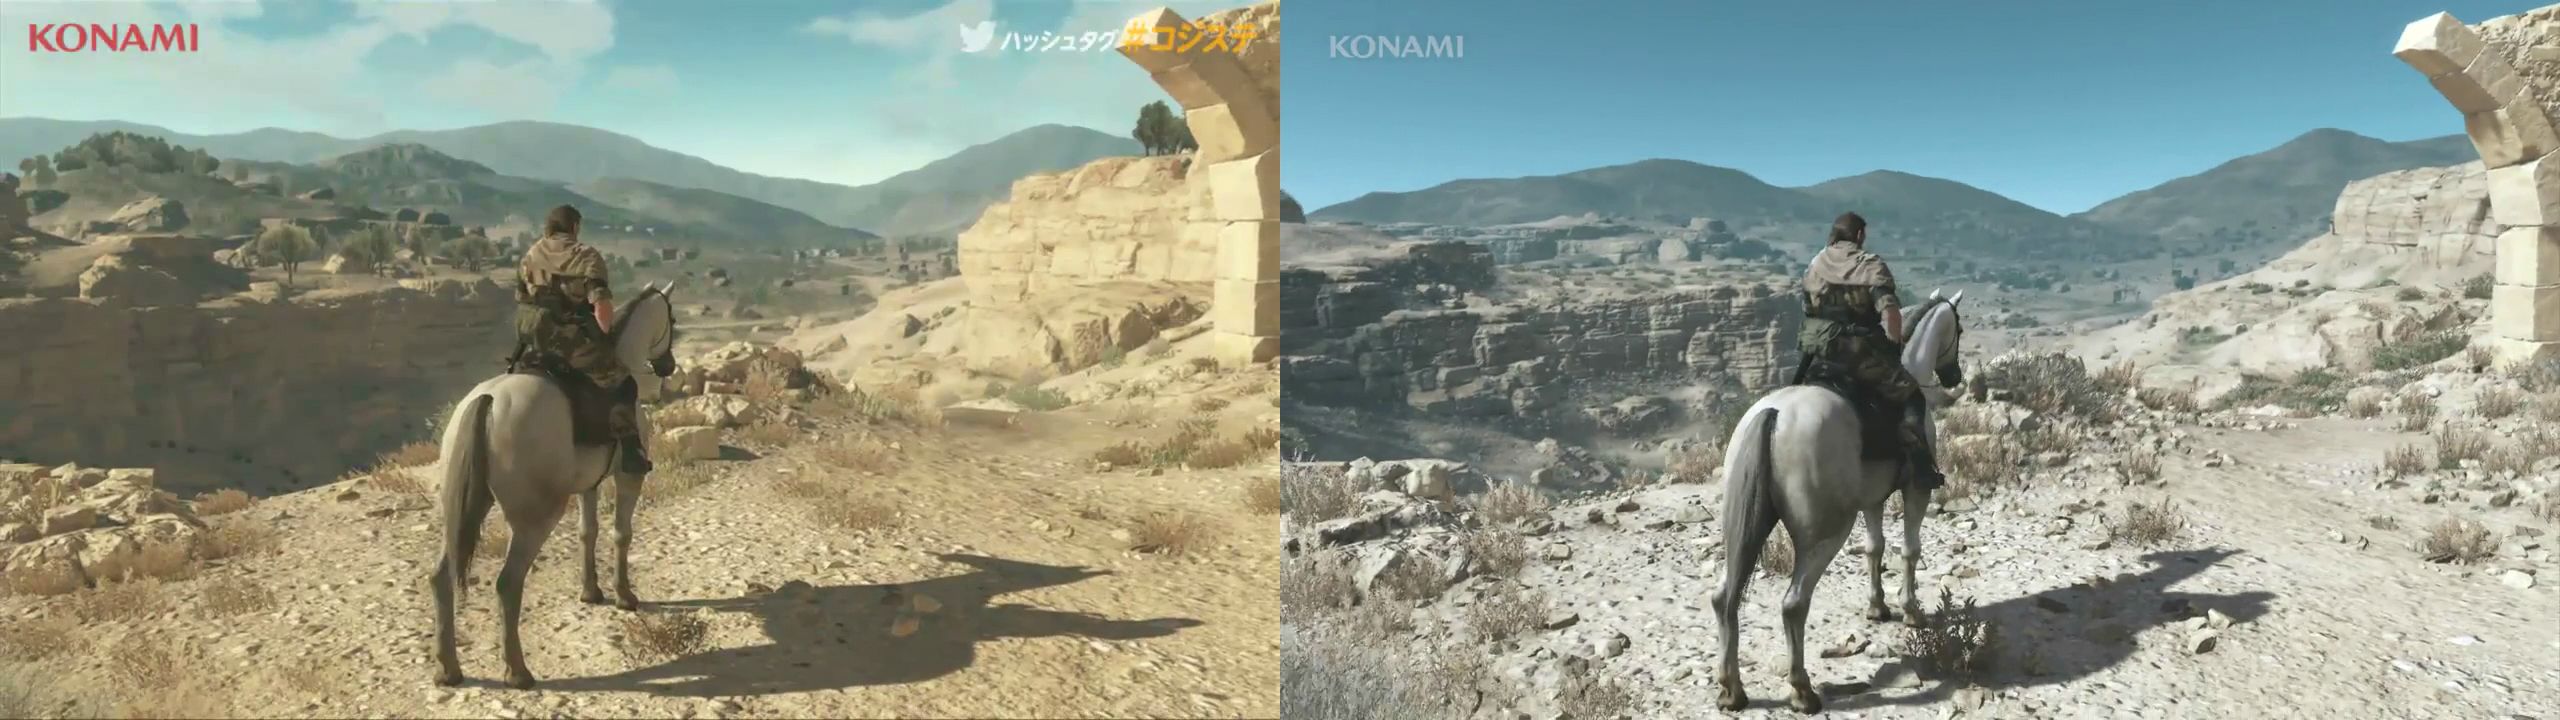 metal gear solid 5 pc vs ps4 graphics